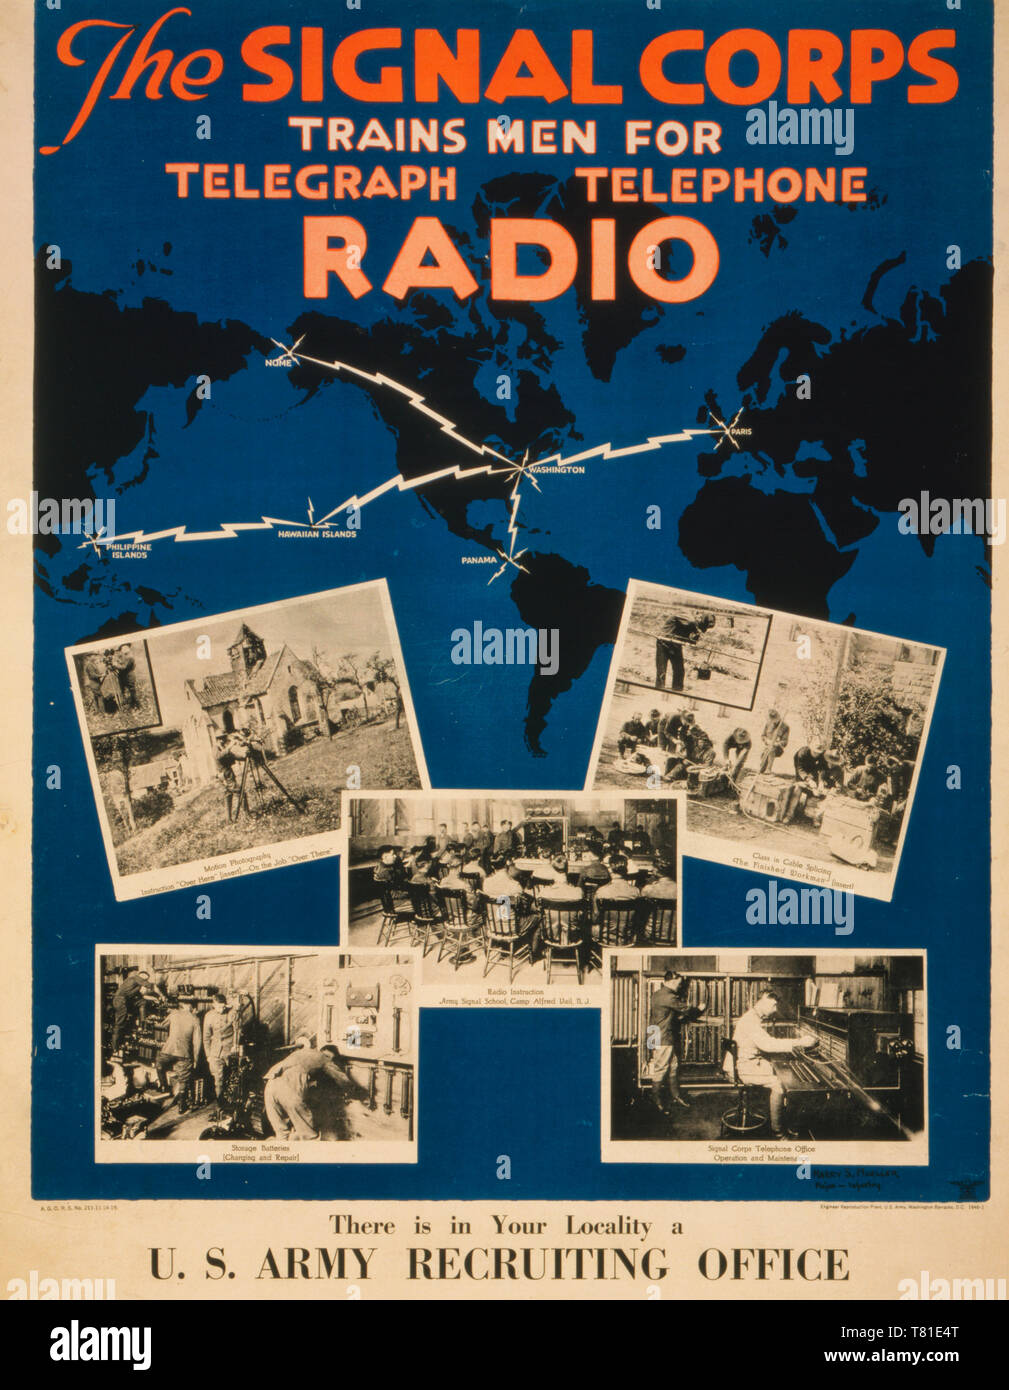 The Signal Corps trains men for telegraph, telephone, radio There is in your locality a U.S. Army recruiting office. U.S. Army Signal Corps recruiting poster showing a map of the world with lines of communication and views of classrooms, offices, workshops, and field instruction. 1919 Stock Photo